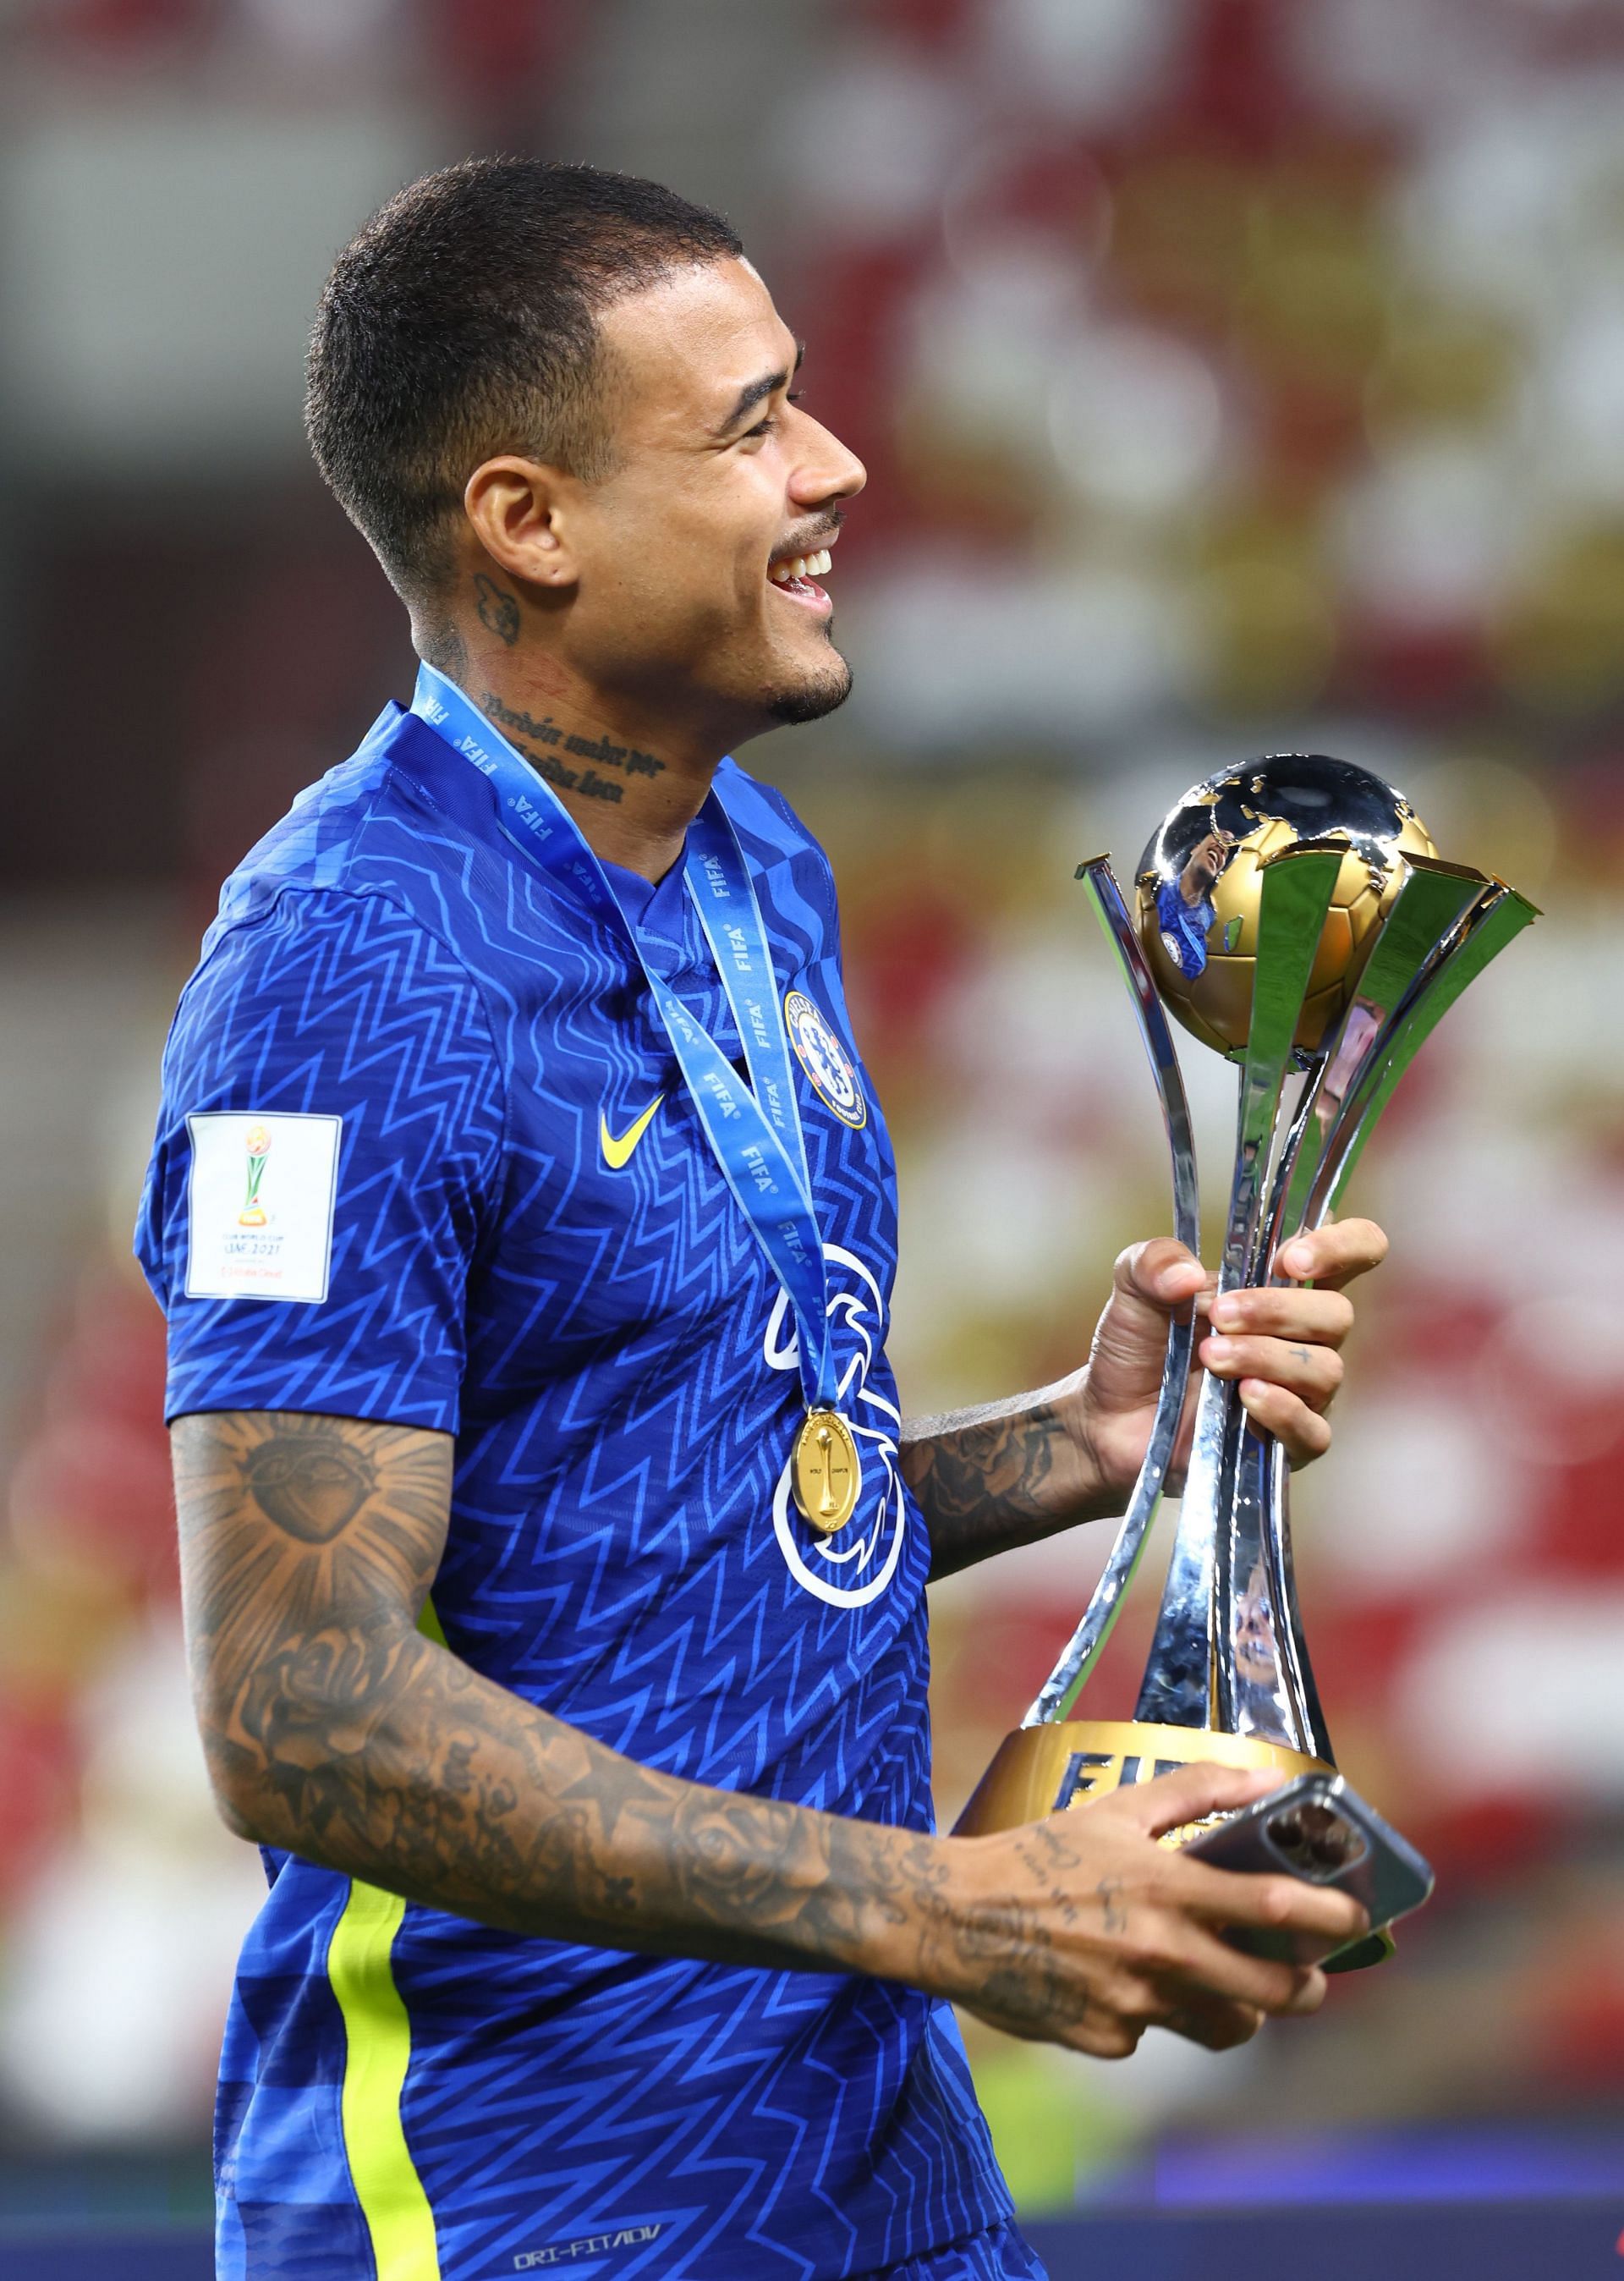 Kenedy holding the FIFA Clun World Cup trophy